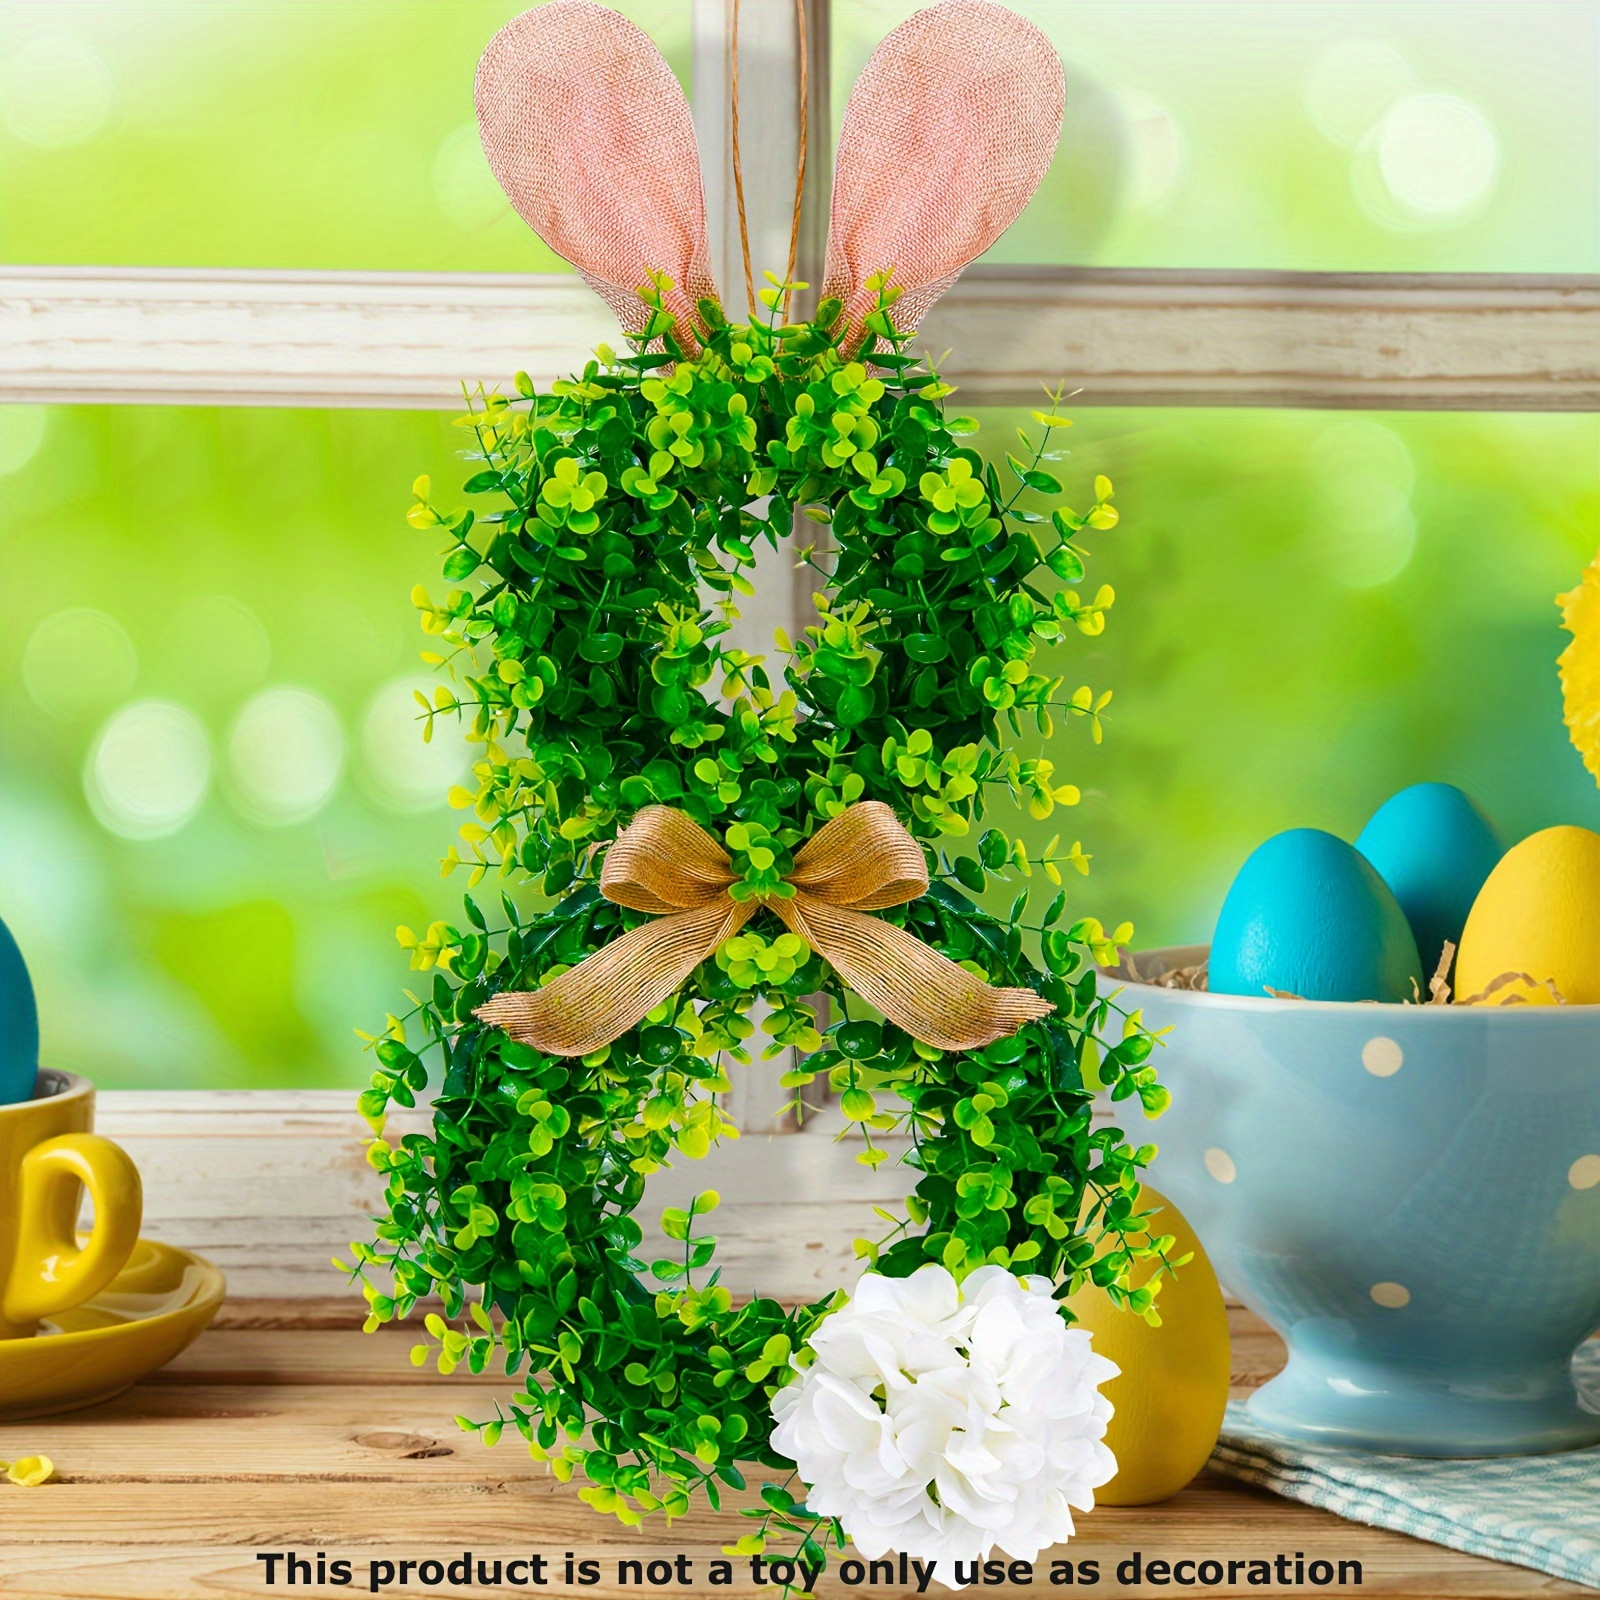 

1pc Easter Decorations, Bunny Ears Flower Wreaths, Window Decorations, Holiday Flower Wreath Decorations, Living Room Background Wall Layout, Wall And Door Decor, Outdoor & Home Decor